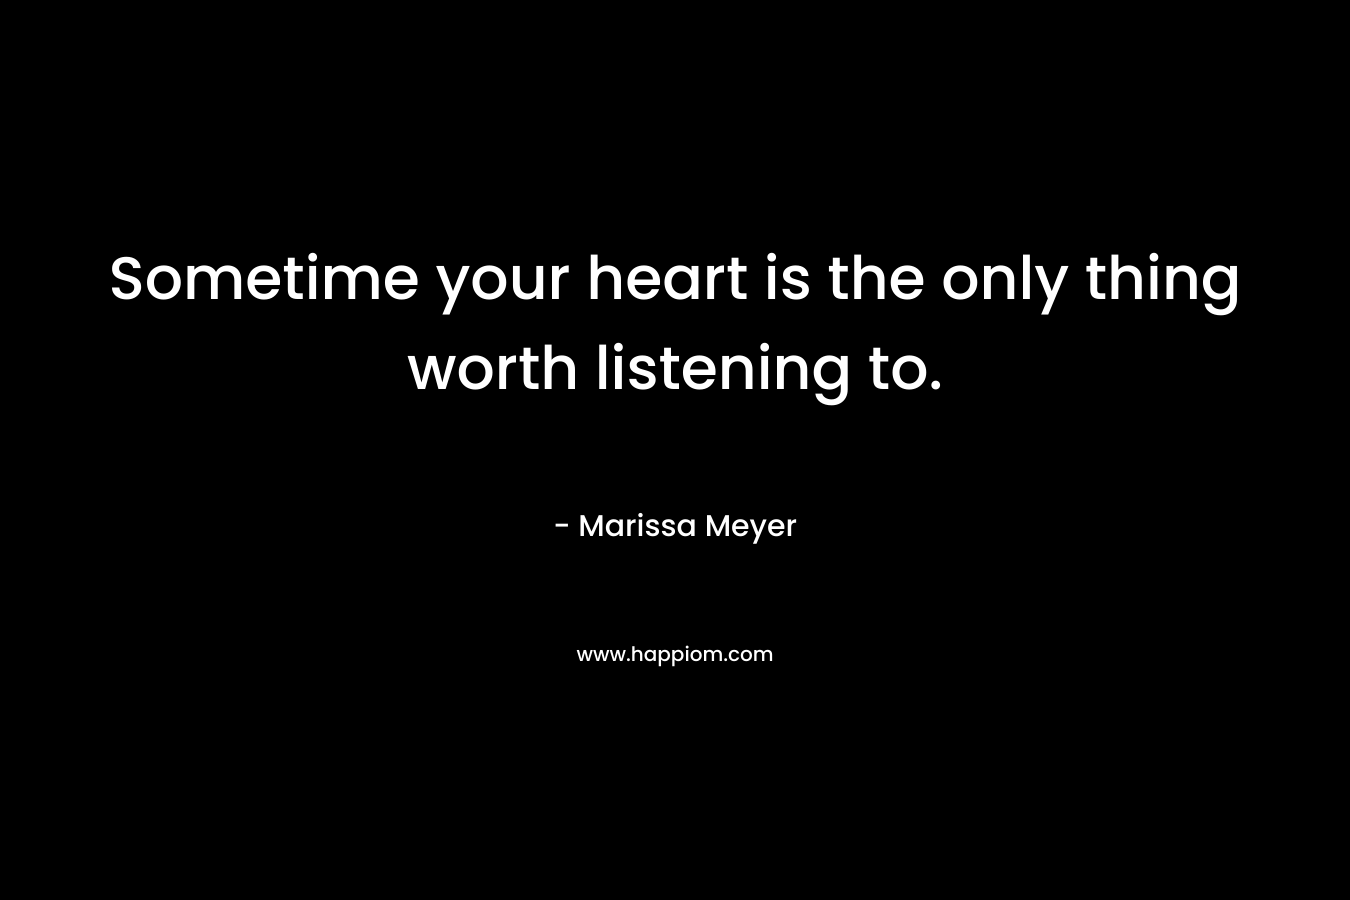 Sometime your heart is the only thing worth listening to.